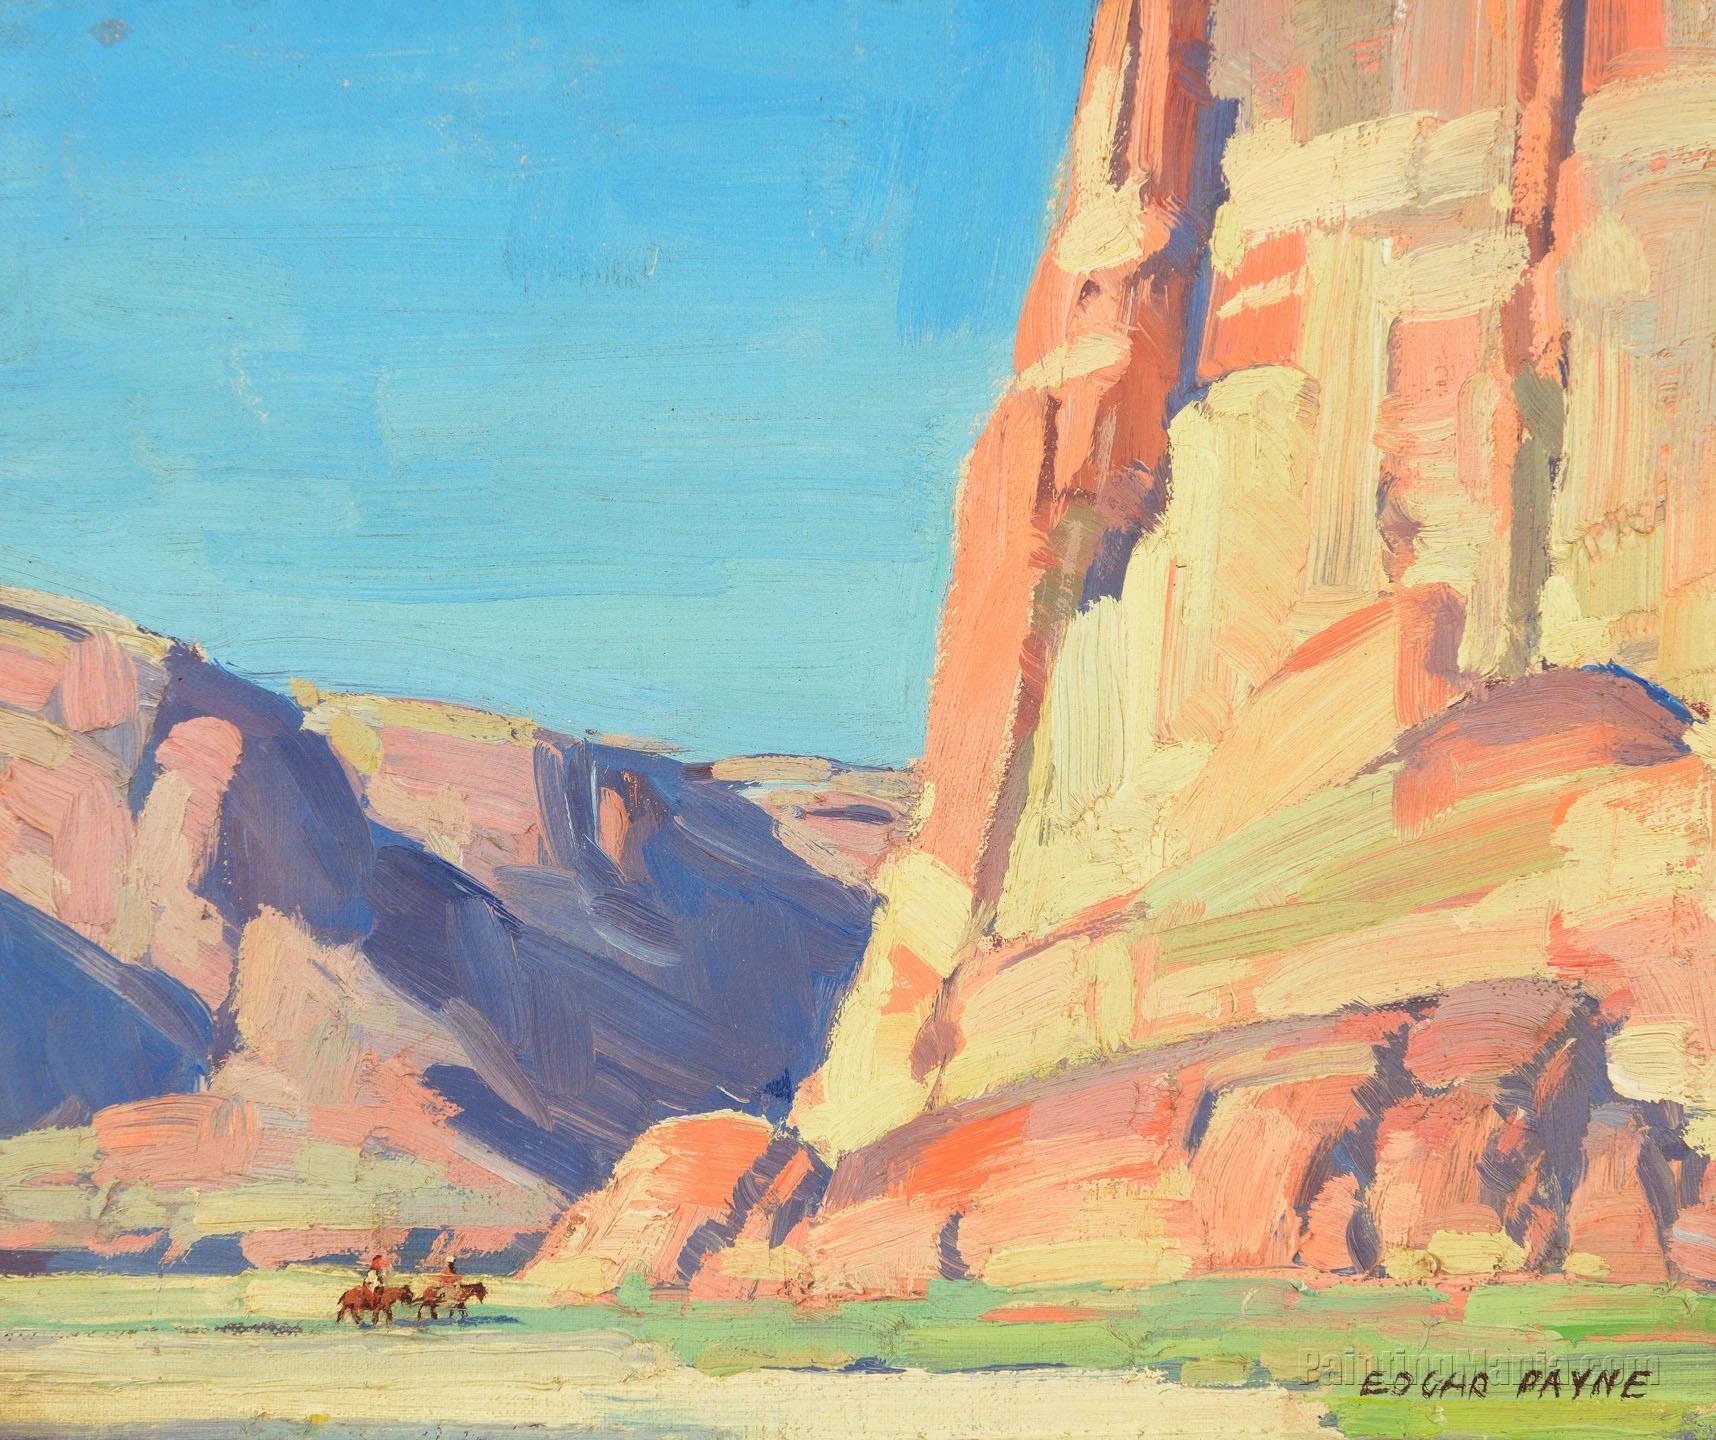 Riders in Canyon de Chelly 4